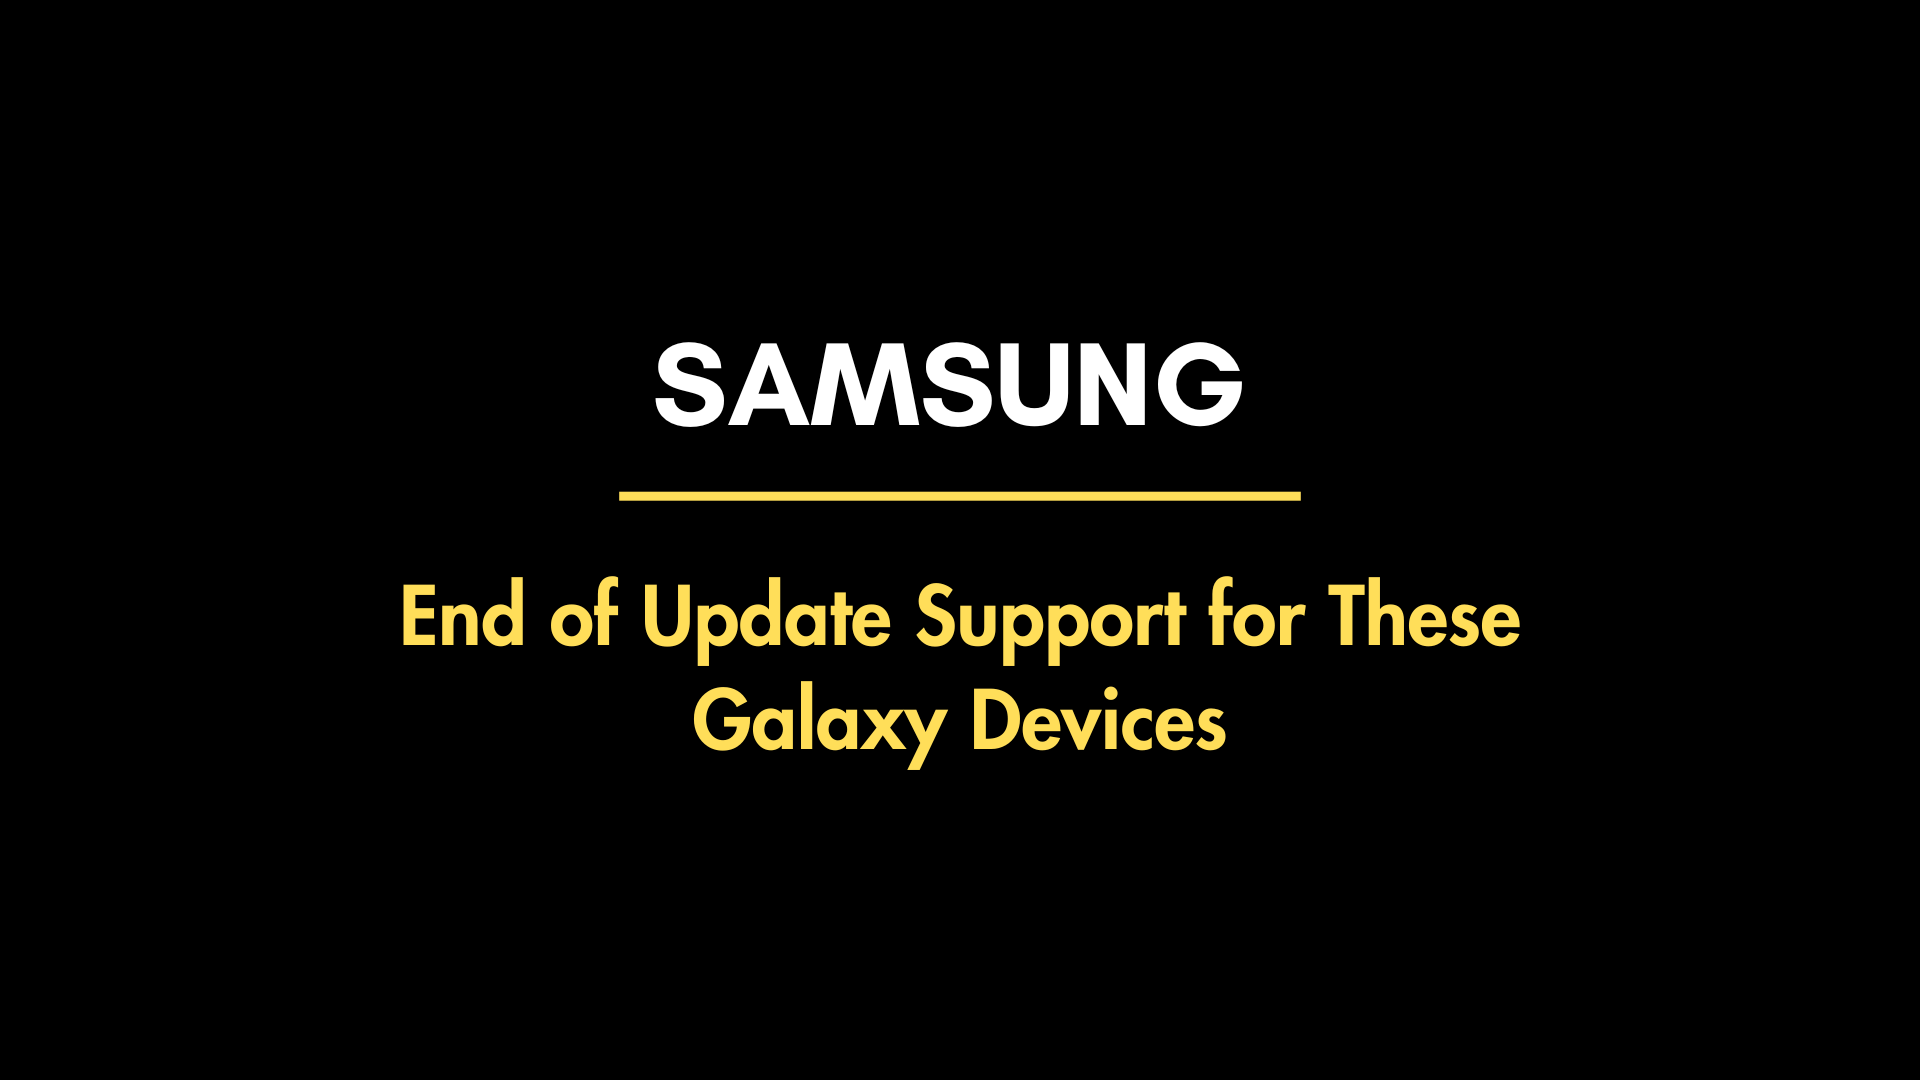 Software support removed for Galaxy devices